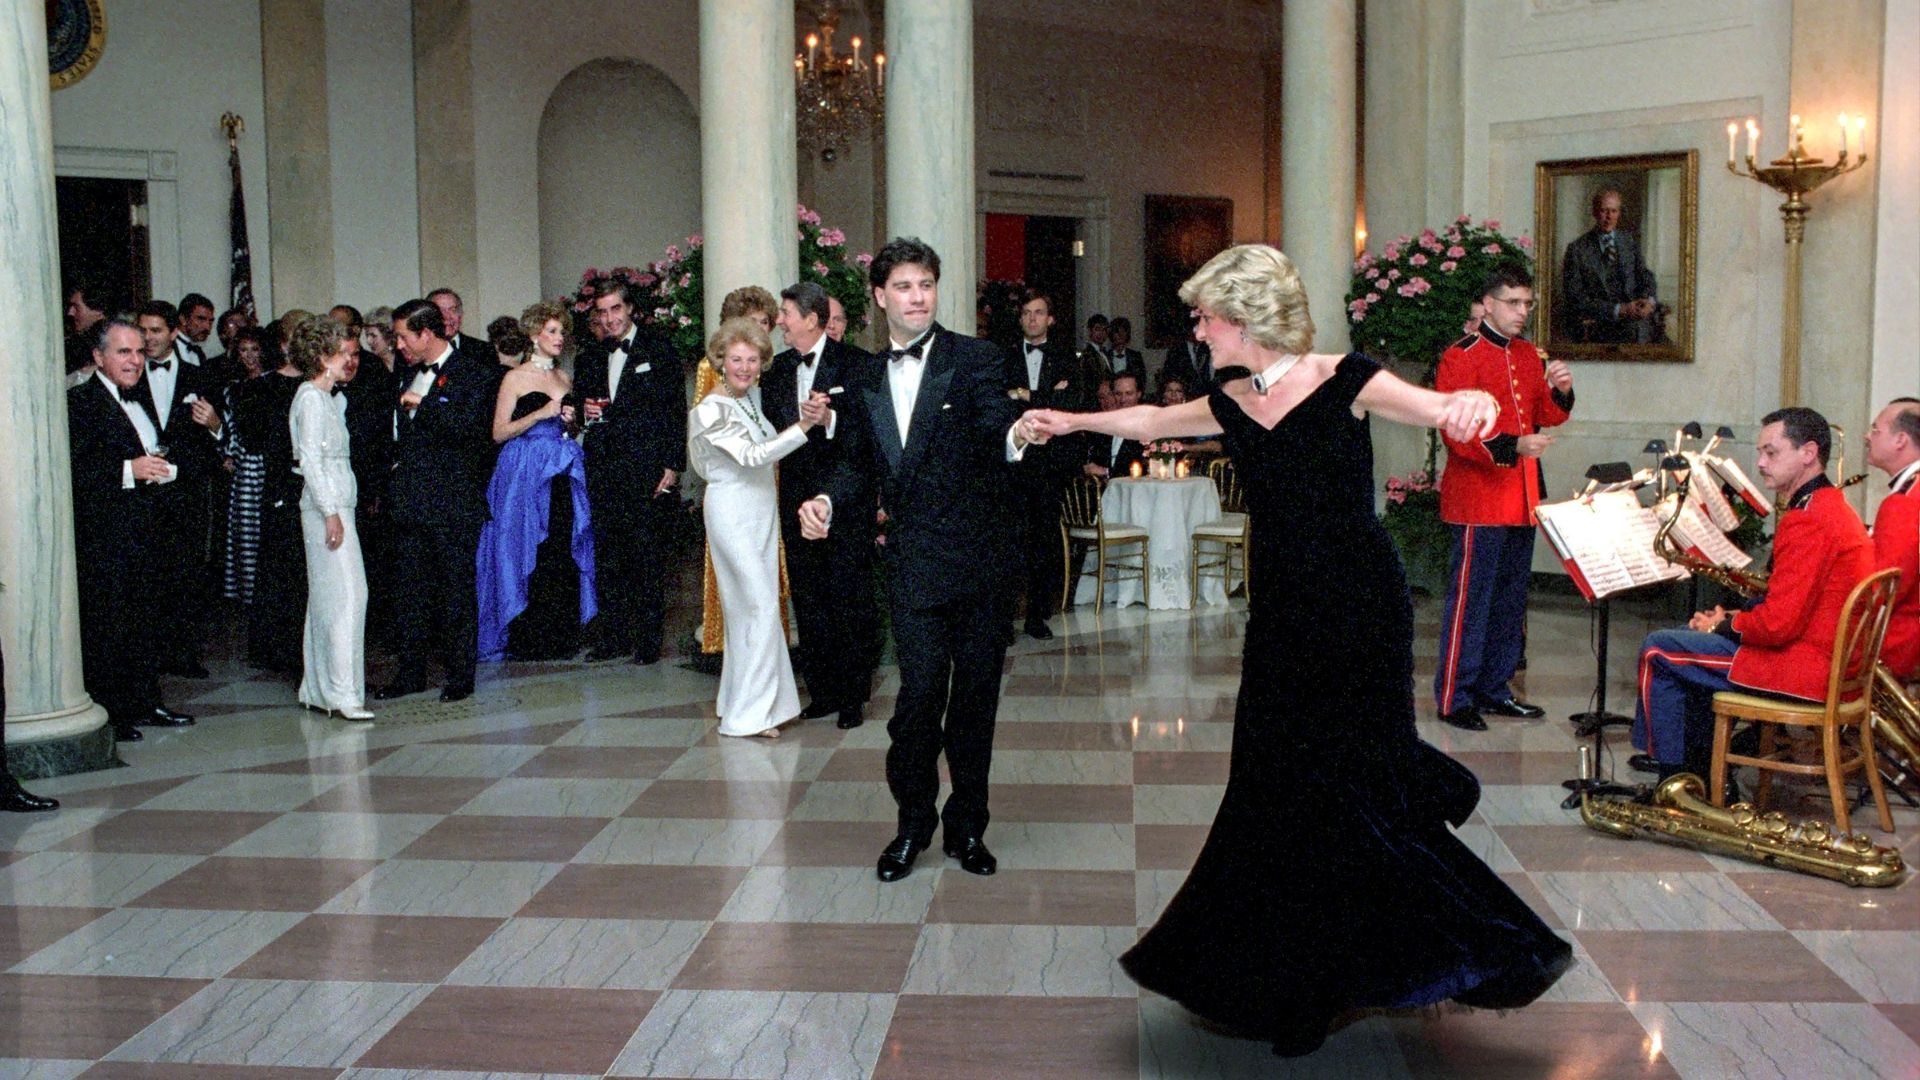 <p>                     At an event hosted by Ronald and Nancy Reagan at the White House in 1985, movie star John Travolta asked Princess Diana for a dance. The songs playing were from two of Travolta's biggest movies, <em>Grease</em> and <em>Saturday Night Fever</em>.                   </p>